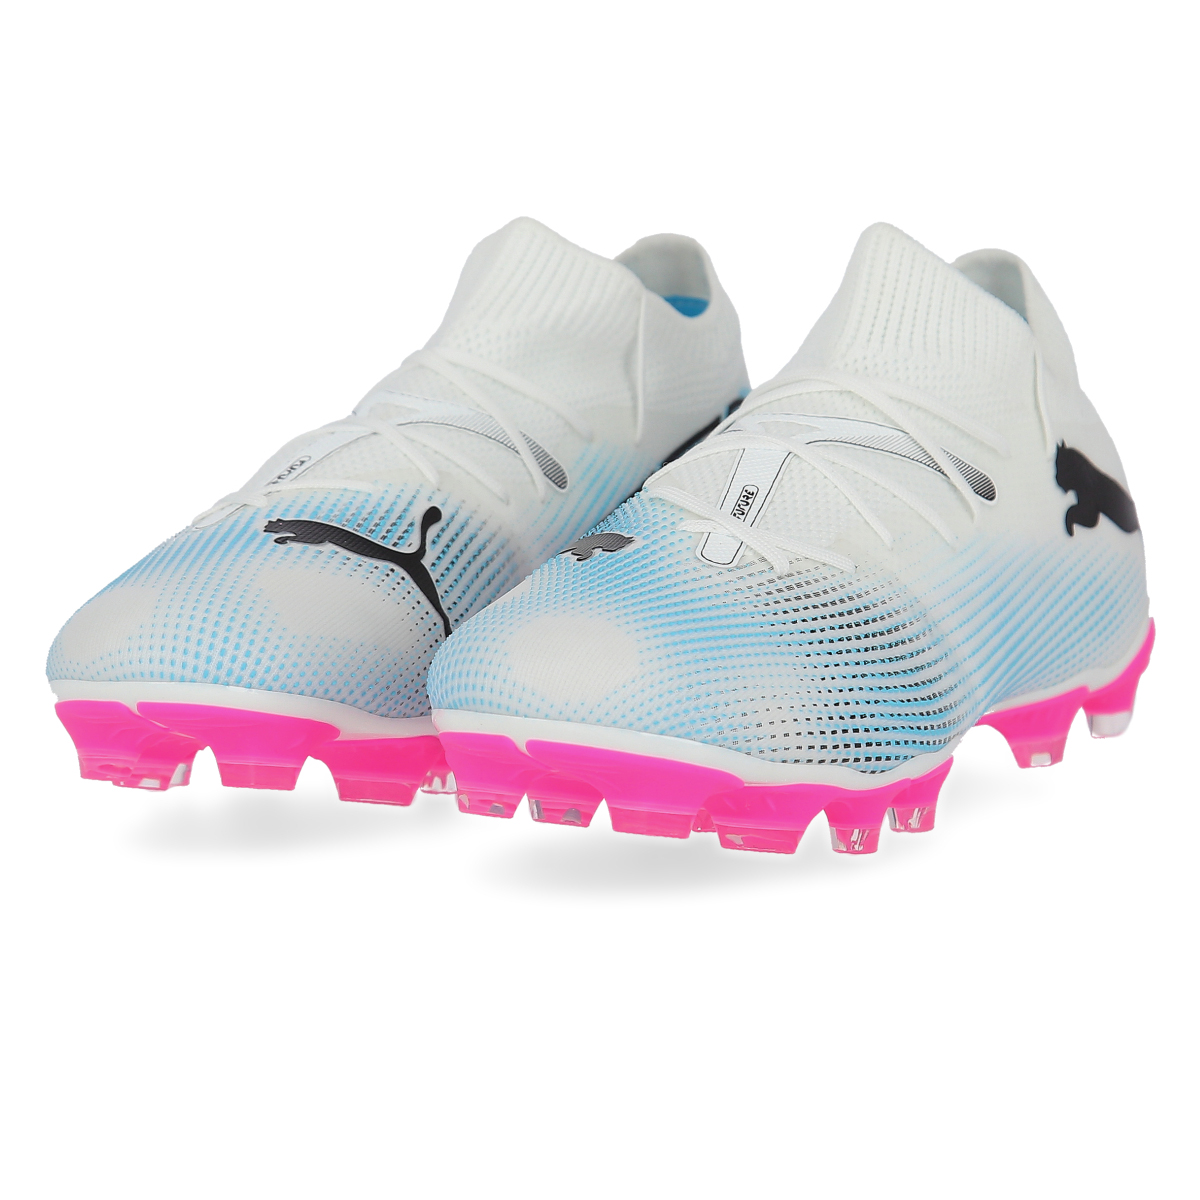 Botines Fútbol Puma Future 7 Match Fg/Ag Mujer,  image number null